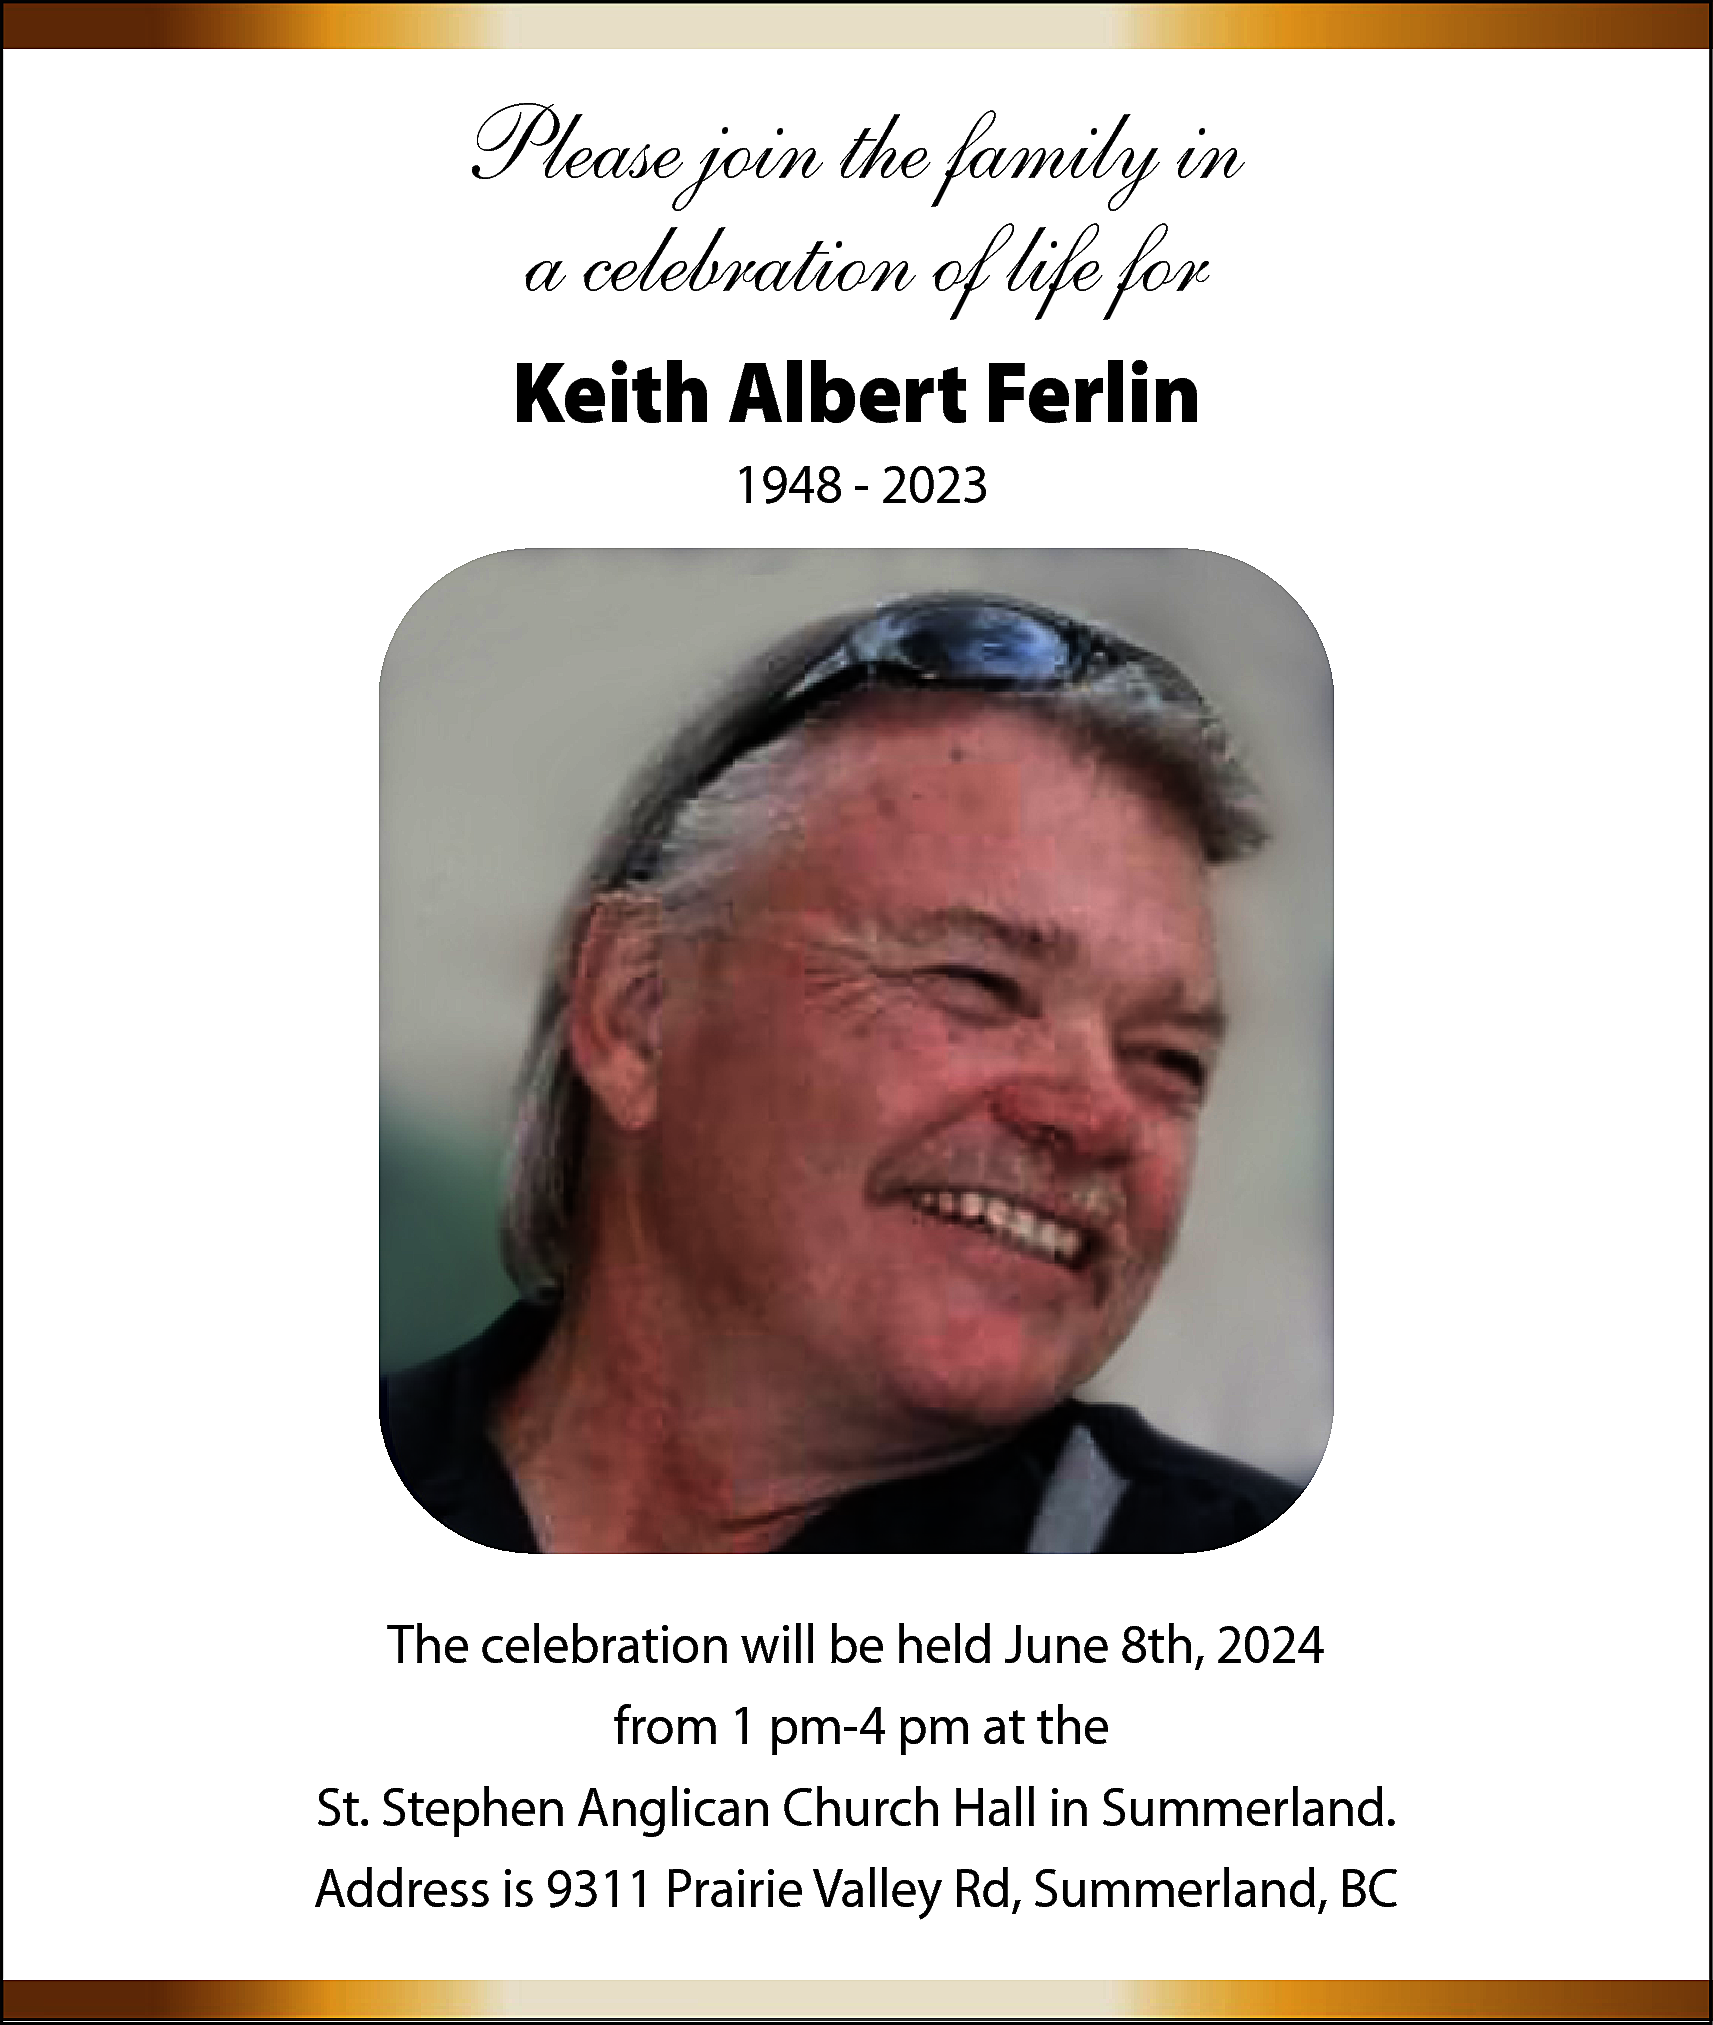 Please join the family in  Please join the family in  a celebration of life for  Keith Albert Ferlin  1948 - 2023    The celebration will be held June 8th, 2024  from 1 pm-4 pm at the  St. Stephen Anglican Church Hall in Summerland.  Address is 9311 Prairie Valley Rd, Summerland, BC    